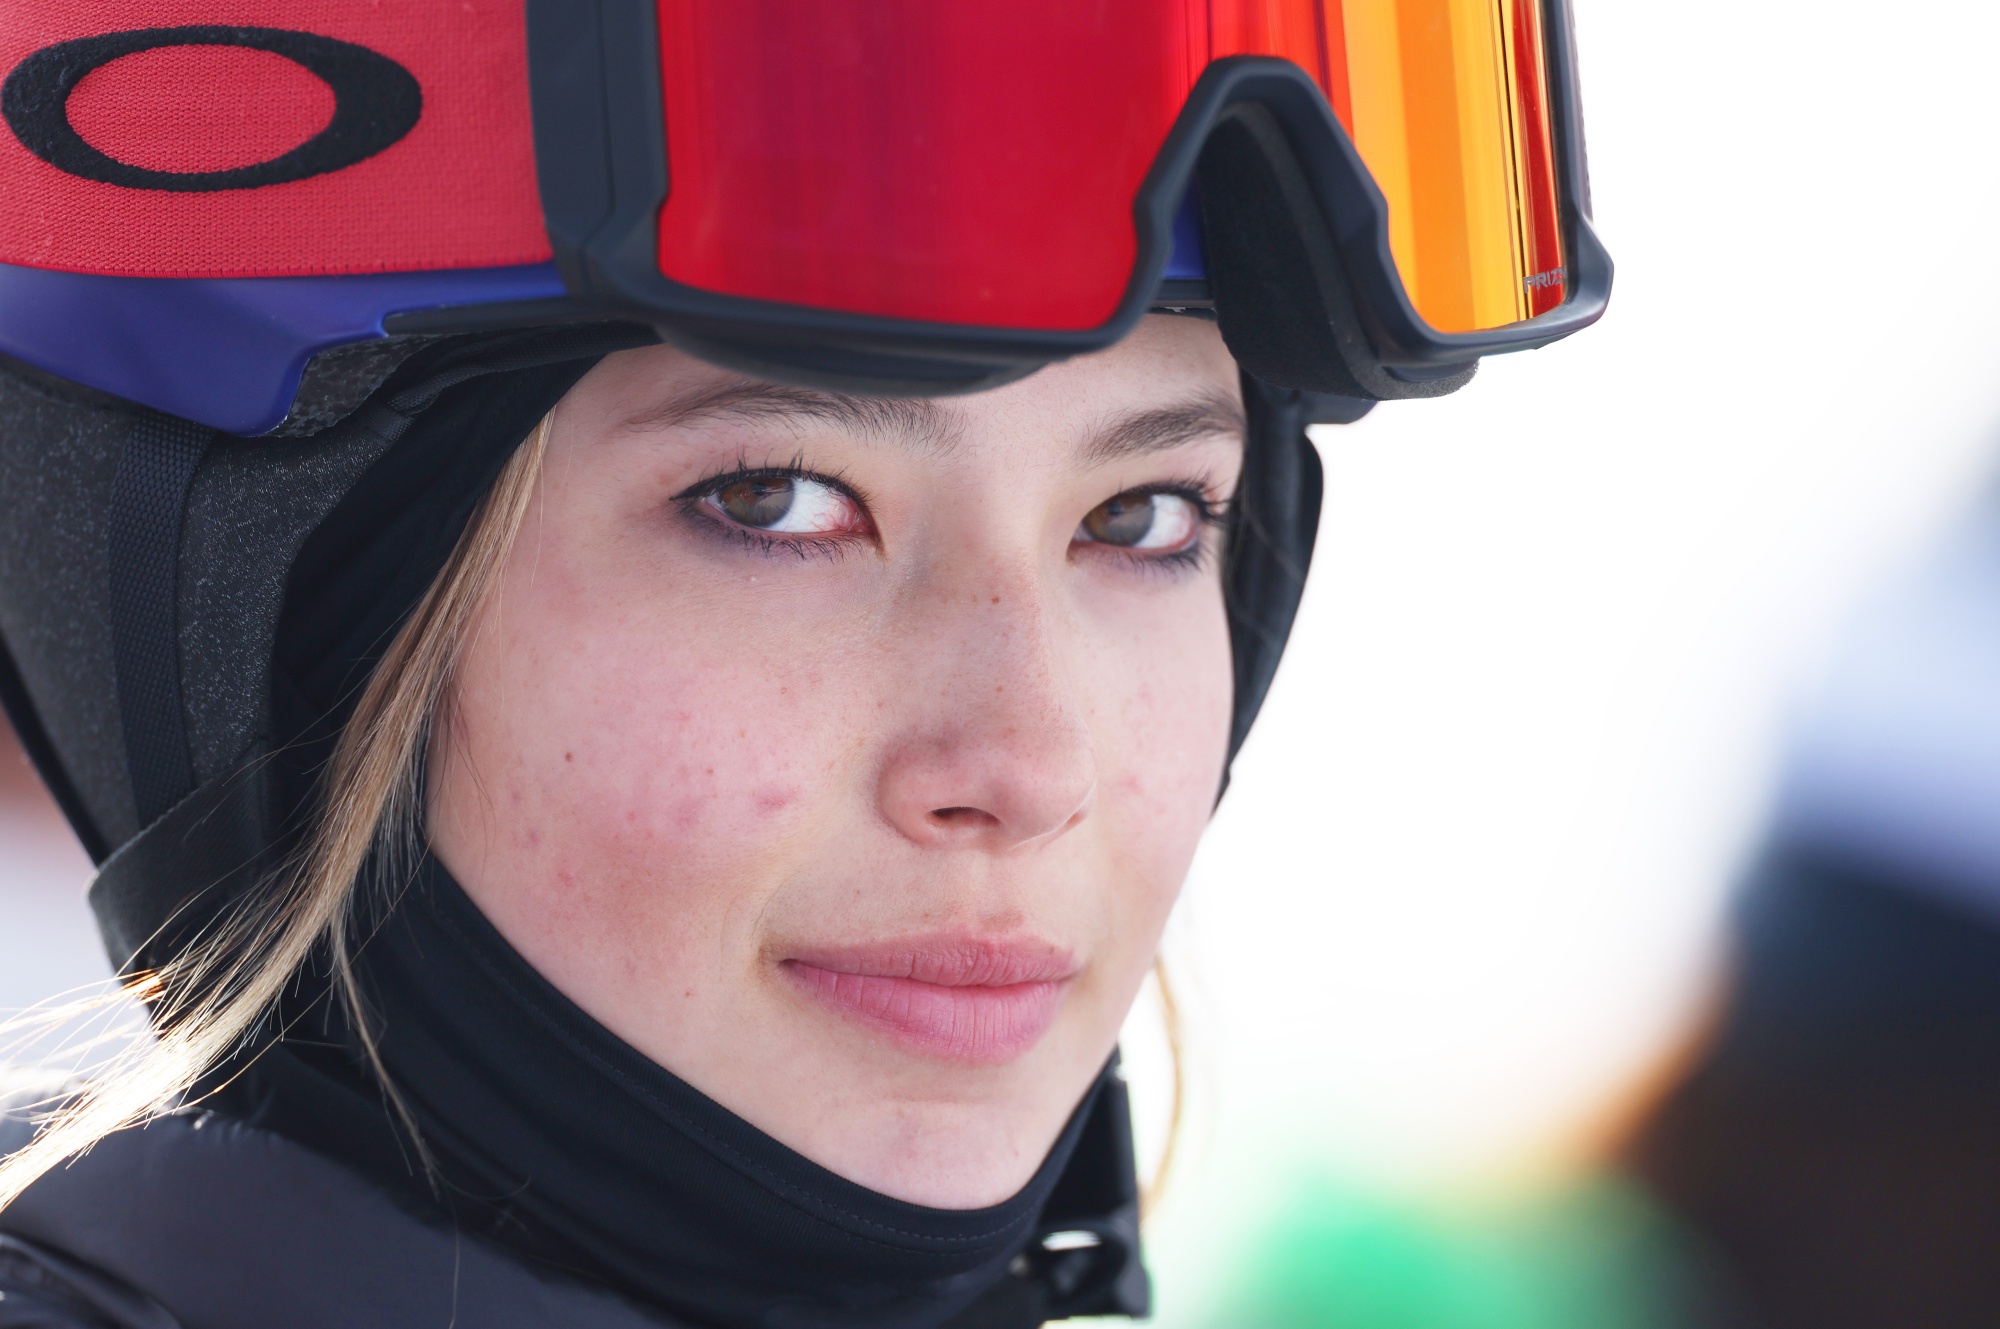 Eileen Gu is the teenage Olympic Gold Medal freeskier who's landing tricks  no woman ever has before